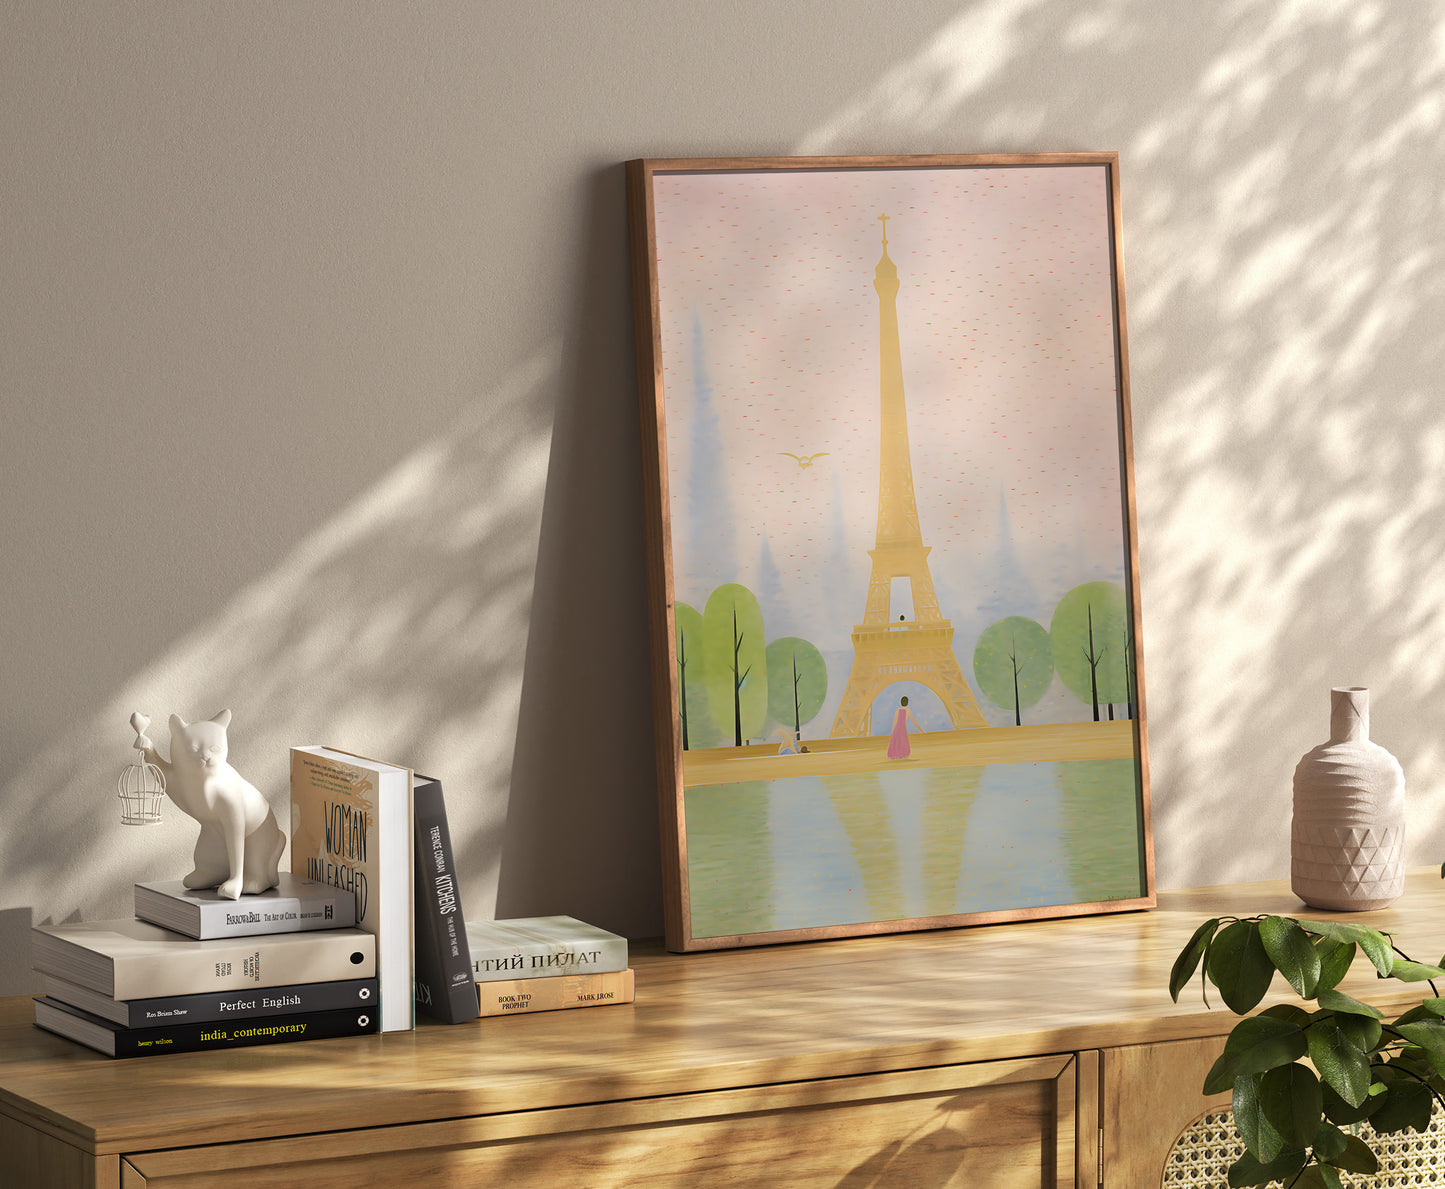 A framed illustration of the Eiffel Tower on a console table with books and decorative objects.